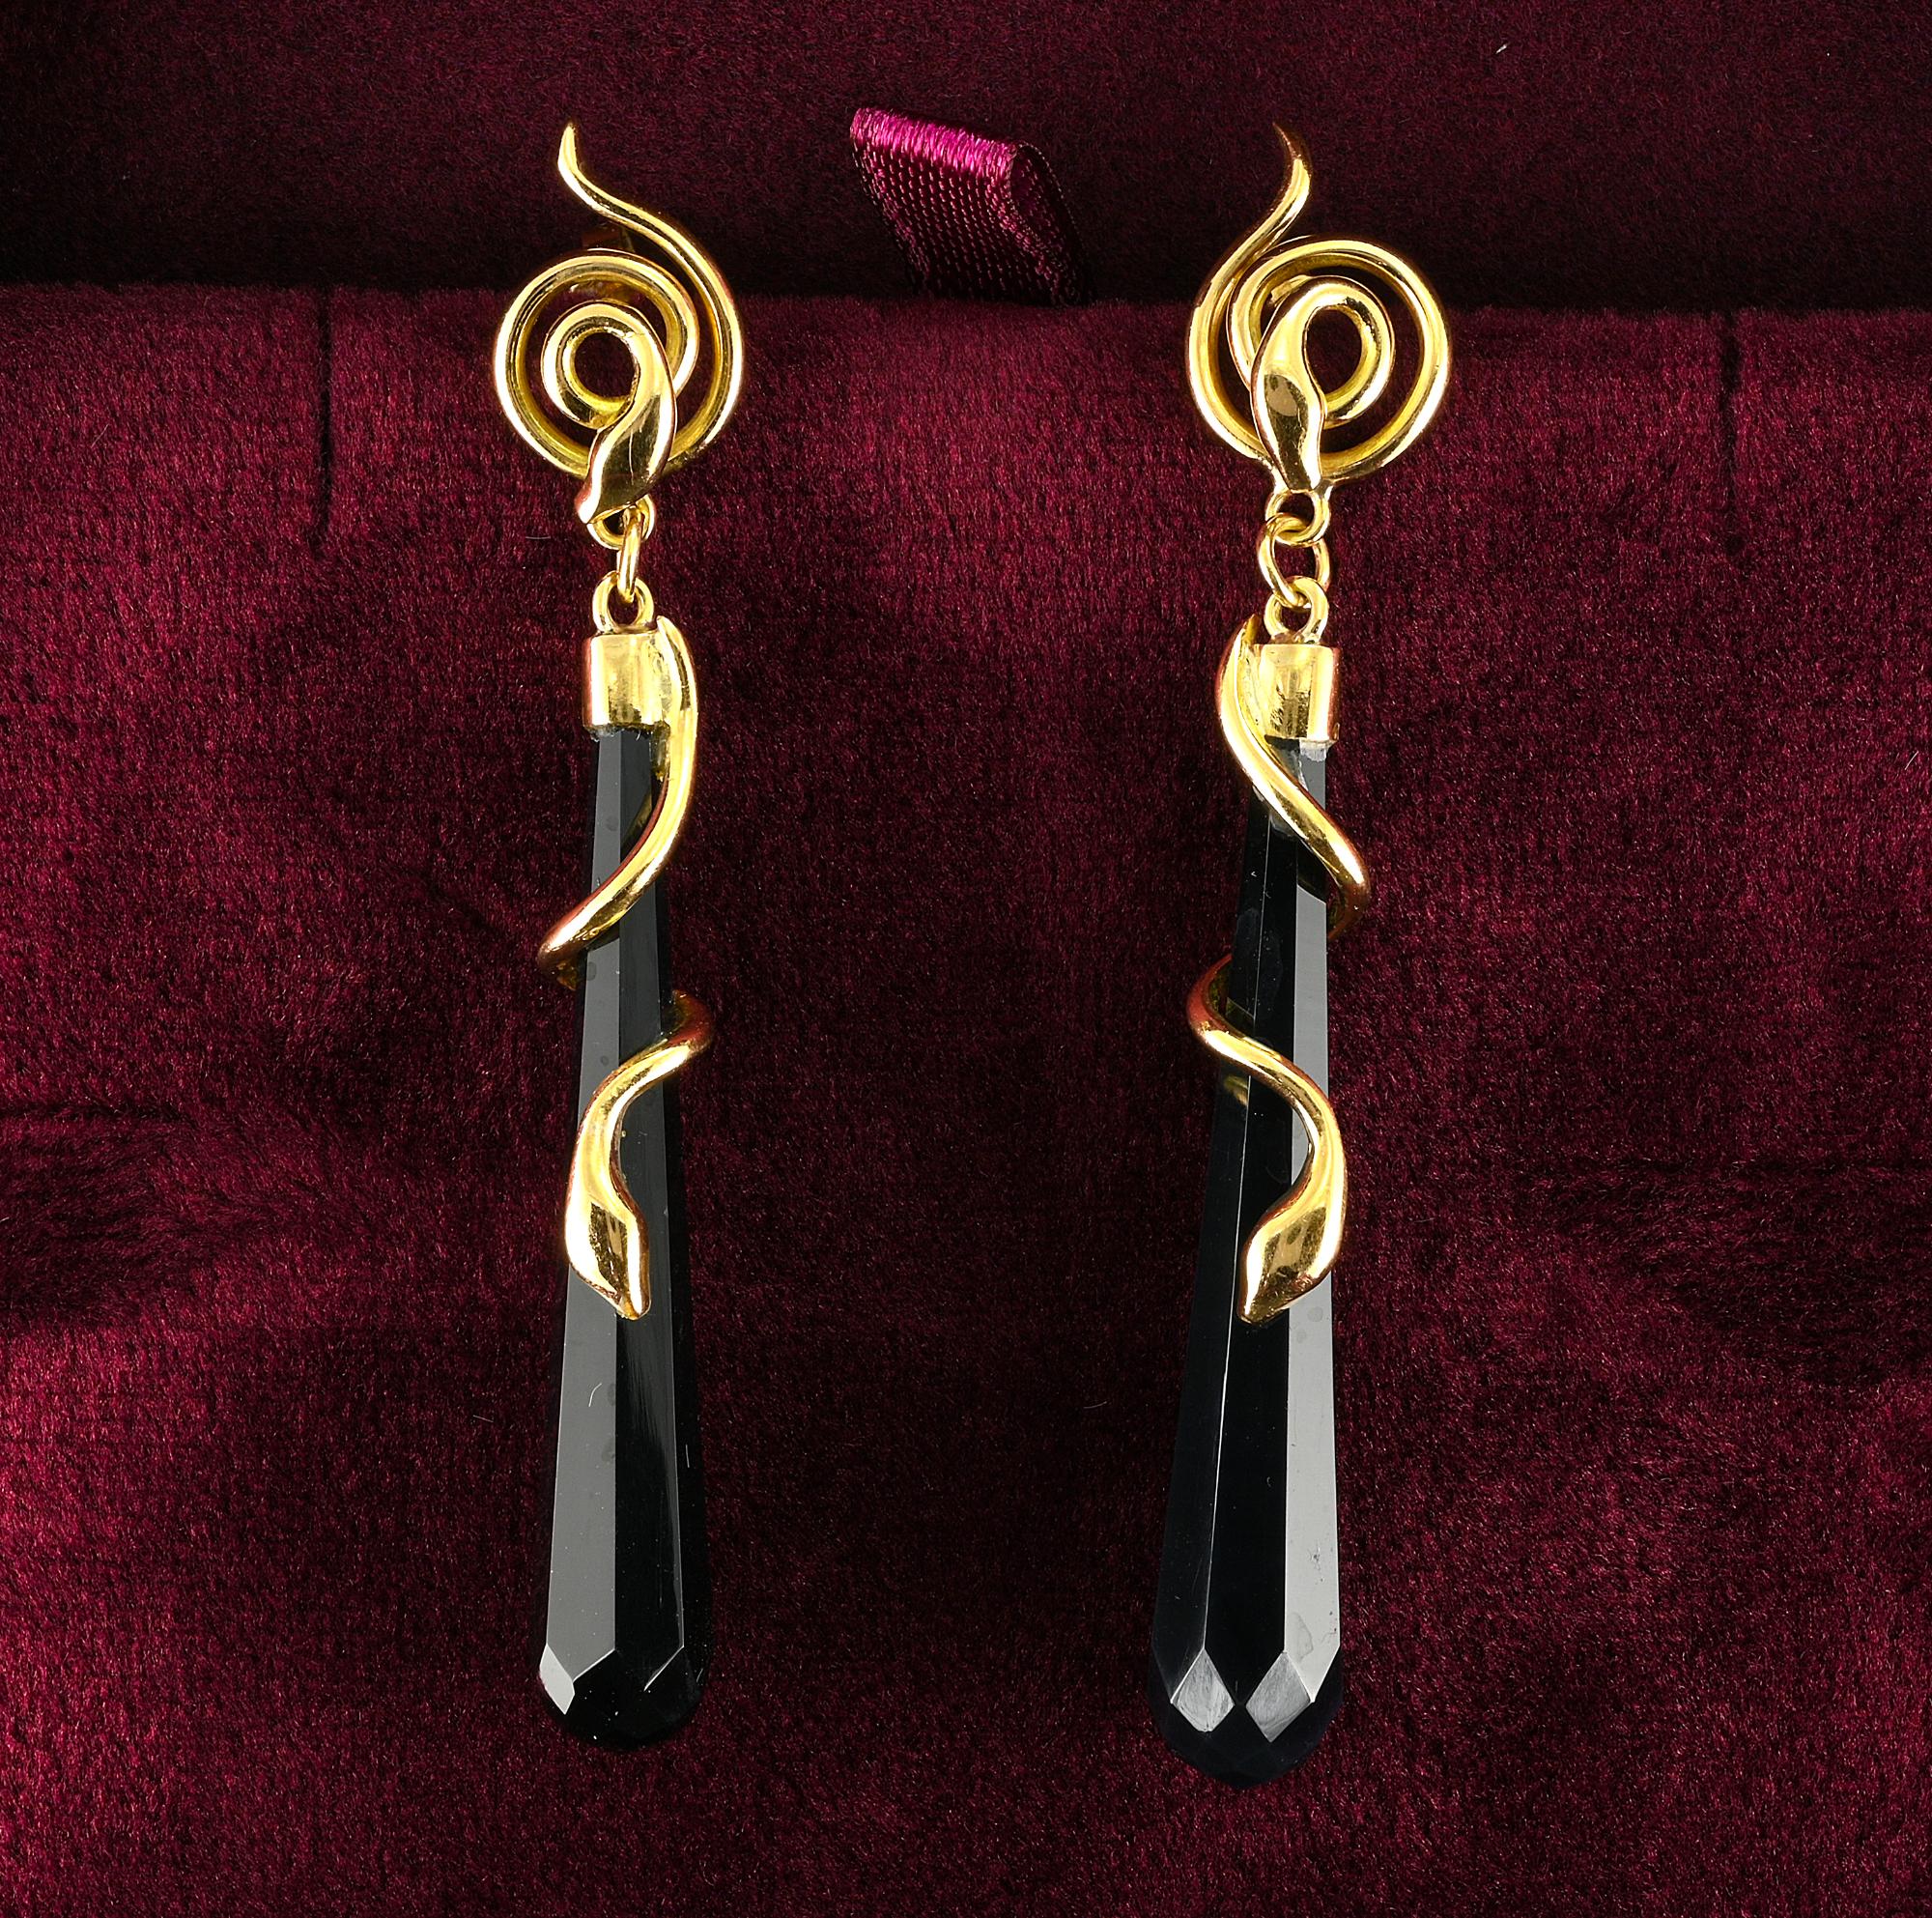 These beautiful long torpedo earrings are Art Deco period, 1925 ca
Hand crafted of solid 18 KT gold with a fascinating snake motif coiling around a long drop of Black Onyx multifaceted torpedo shaped, top is a snake coiling in round
Italian